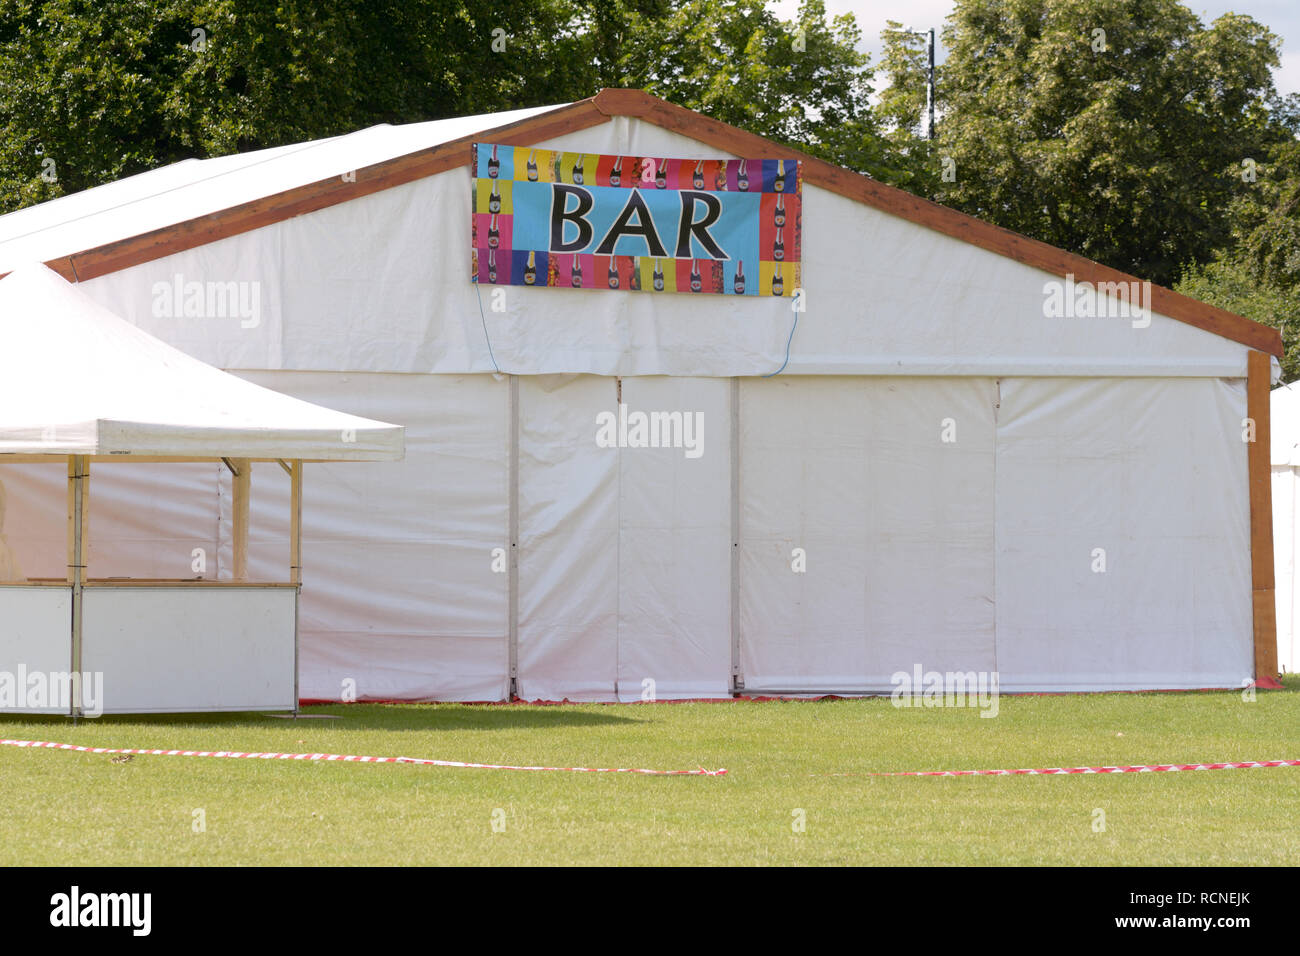 Bar tent - closed for business at festival site Stock Photo